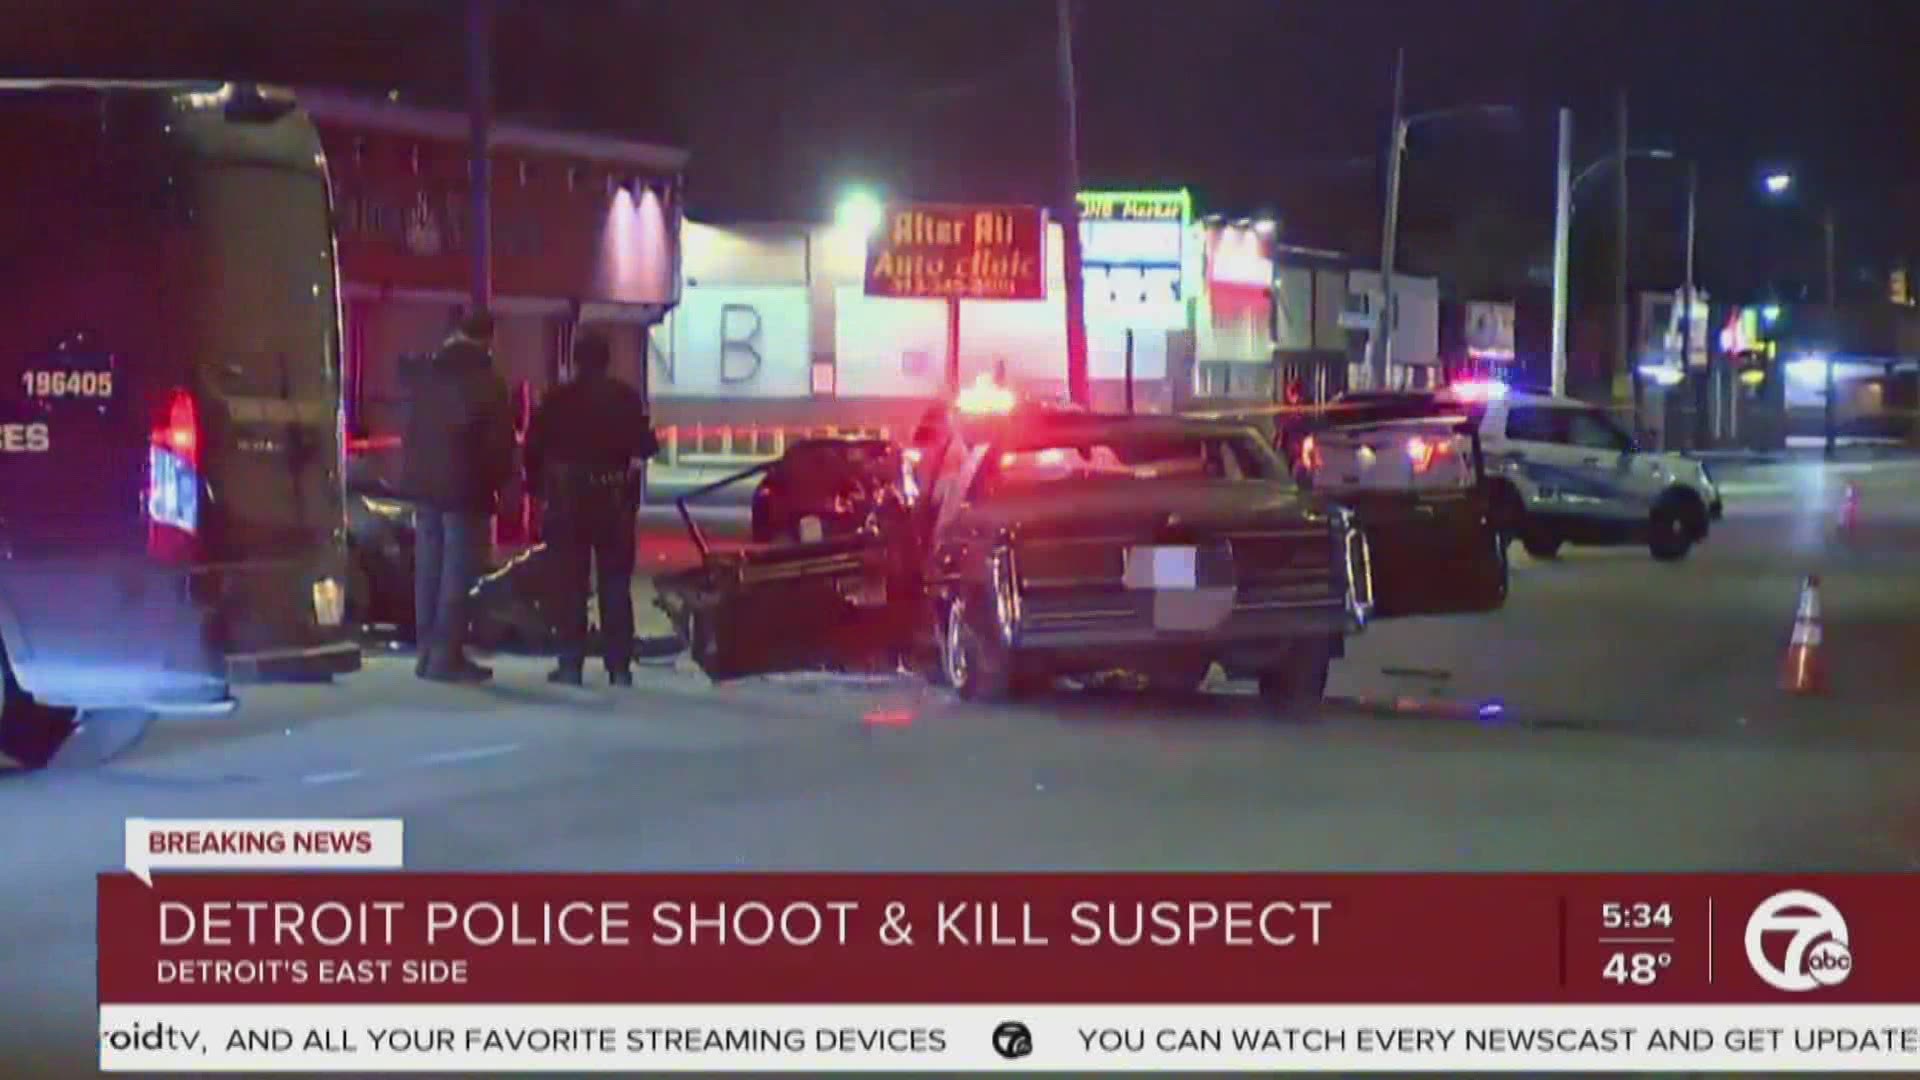 Detroit police officers have shot and killed a suspect overnight on the city's northeast side, according to WXYZ Detroit.